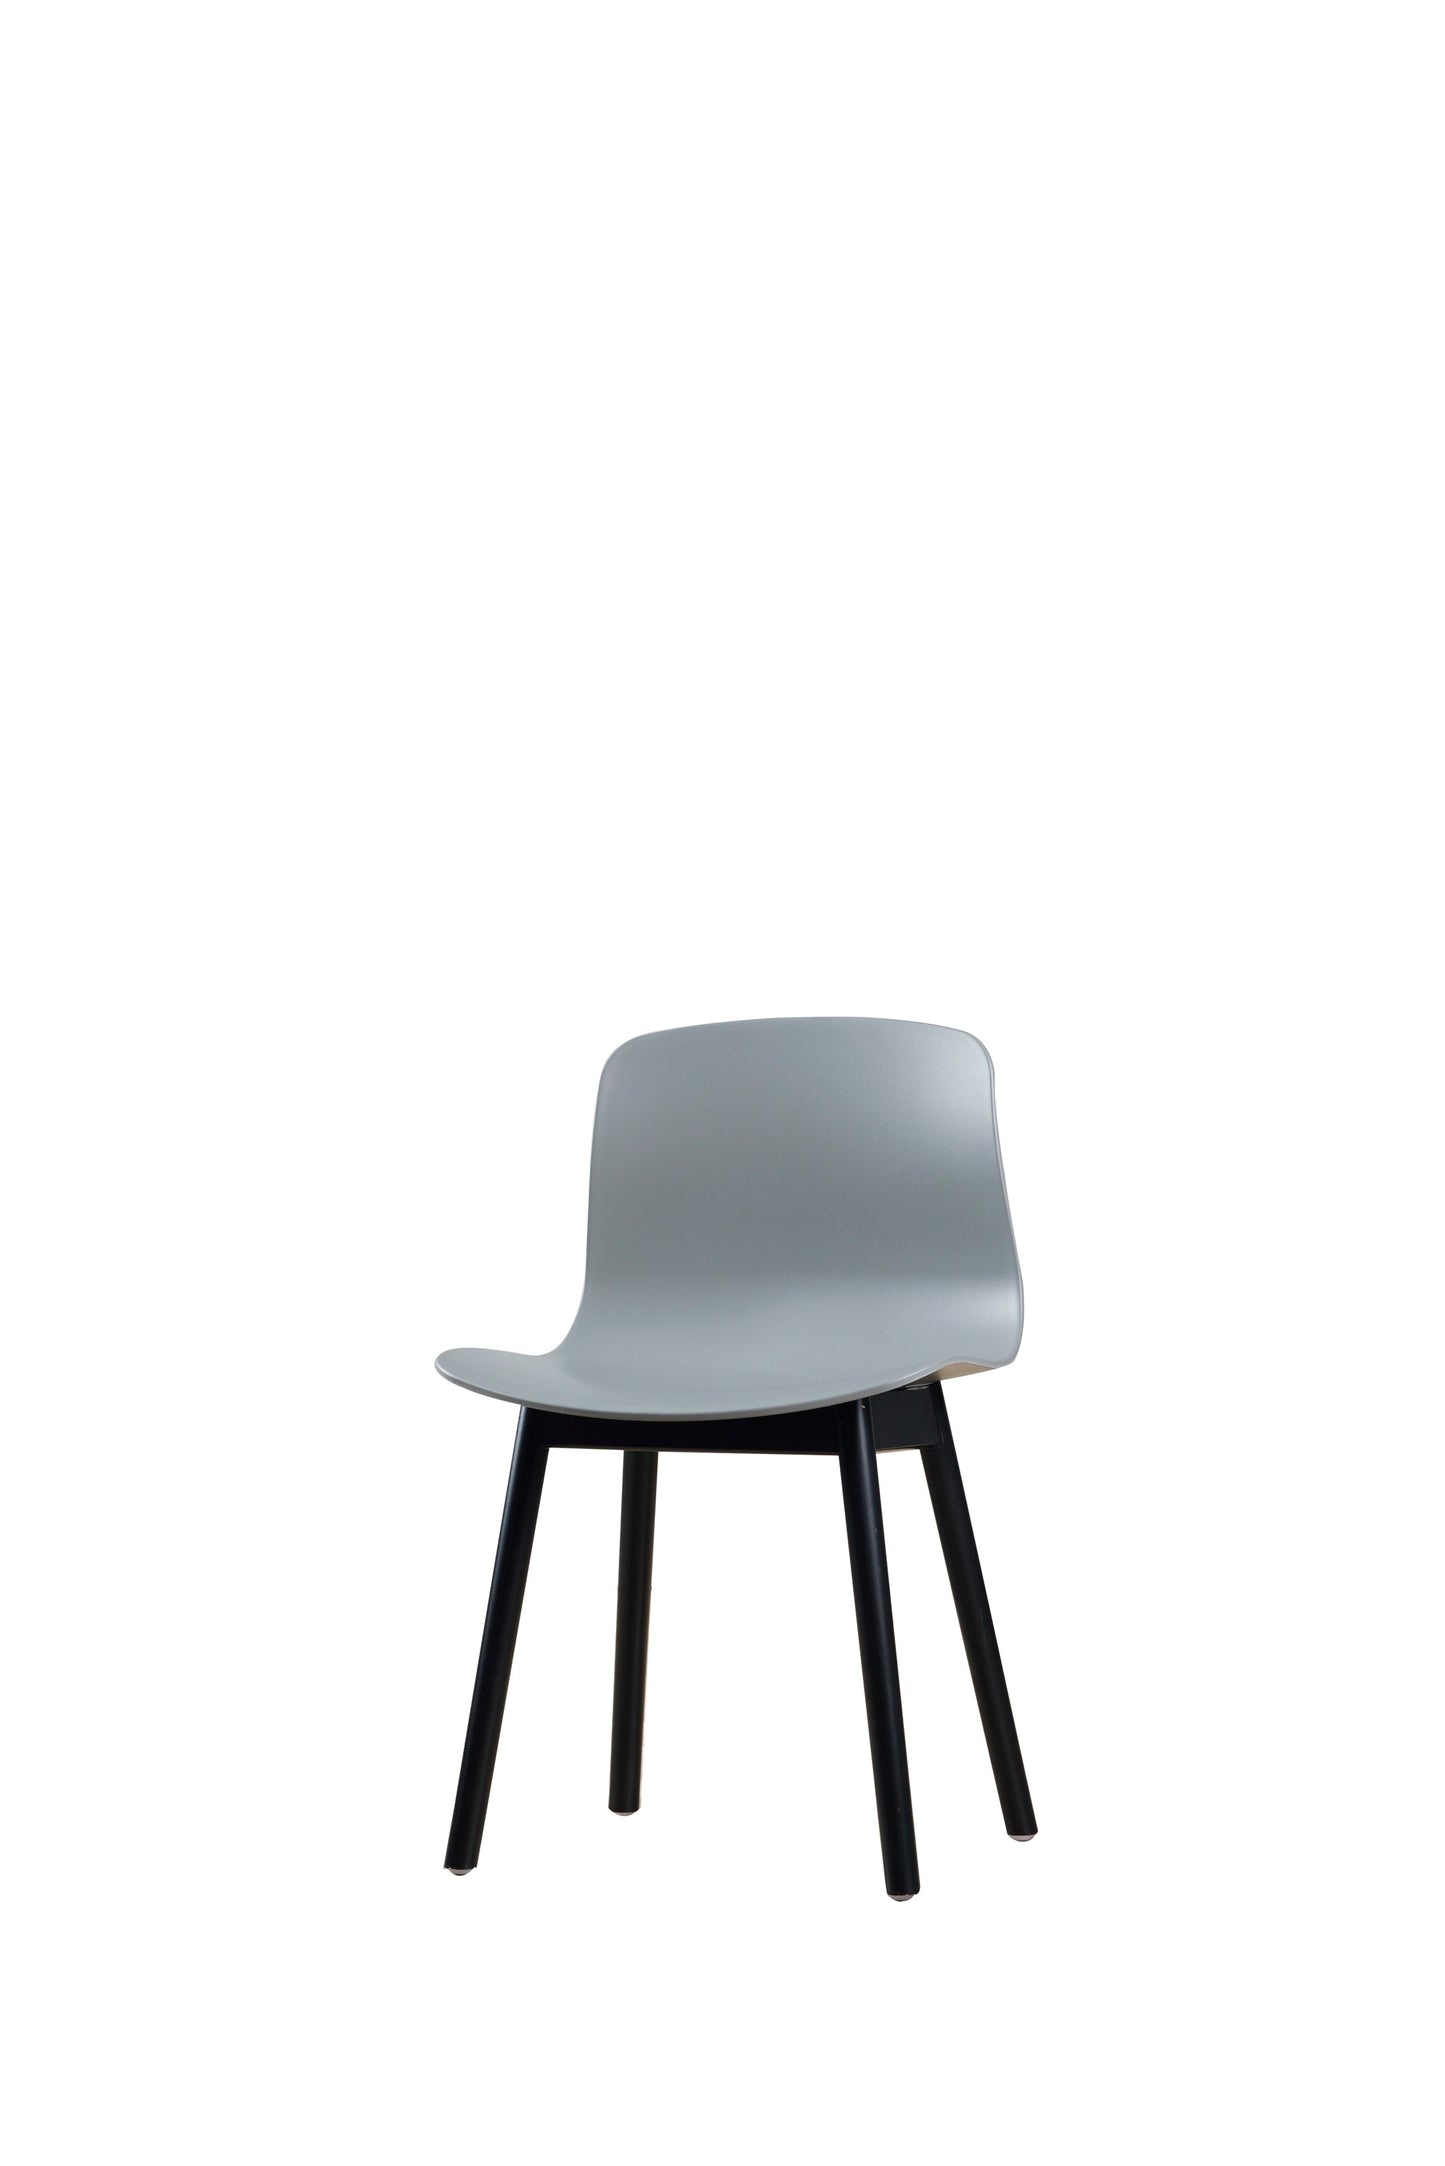 Adapt Full Upholstered Chair with Wood Base 4006